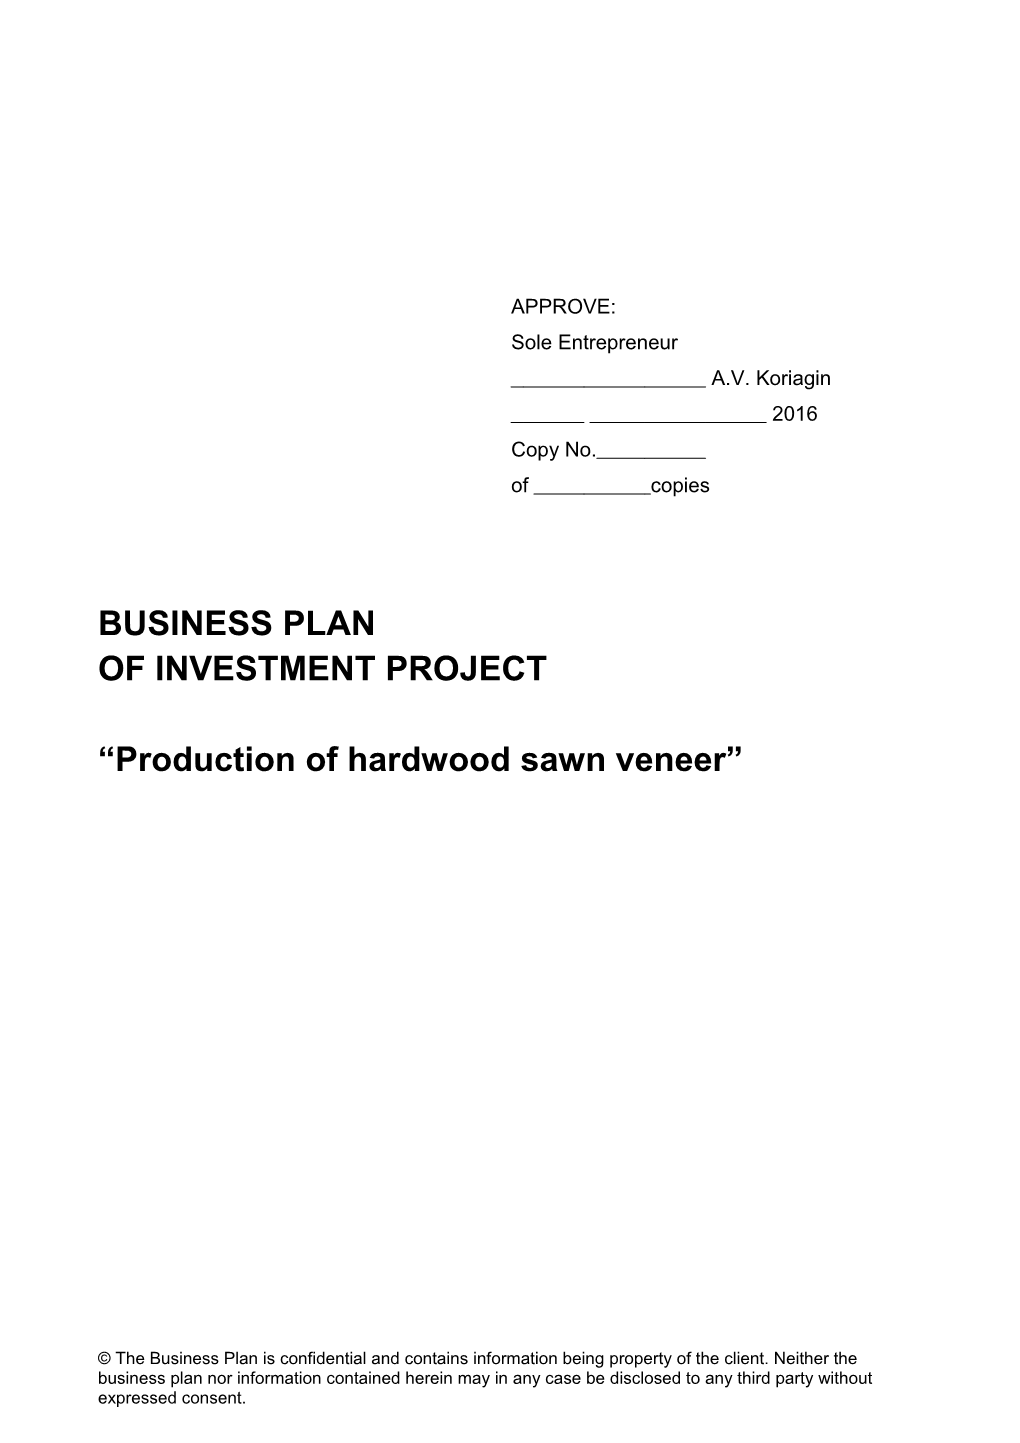 Business Plan of Investment Project Production of Hardwood Sawn Veneer